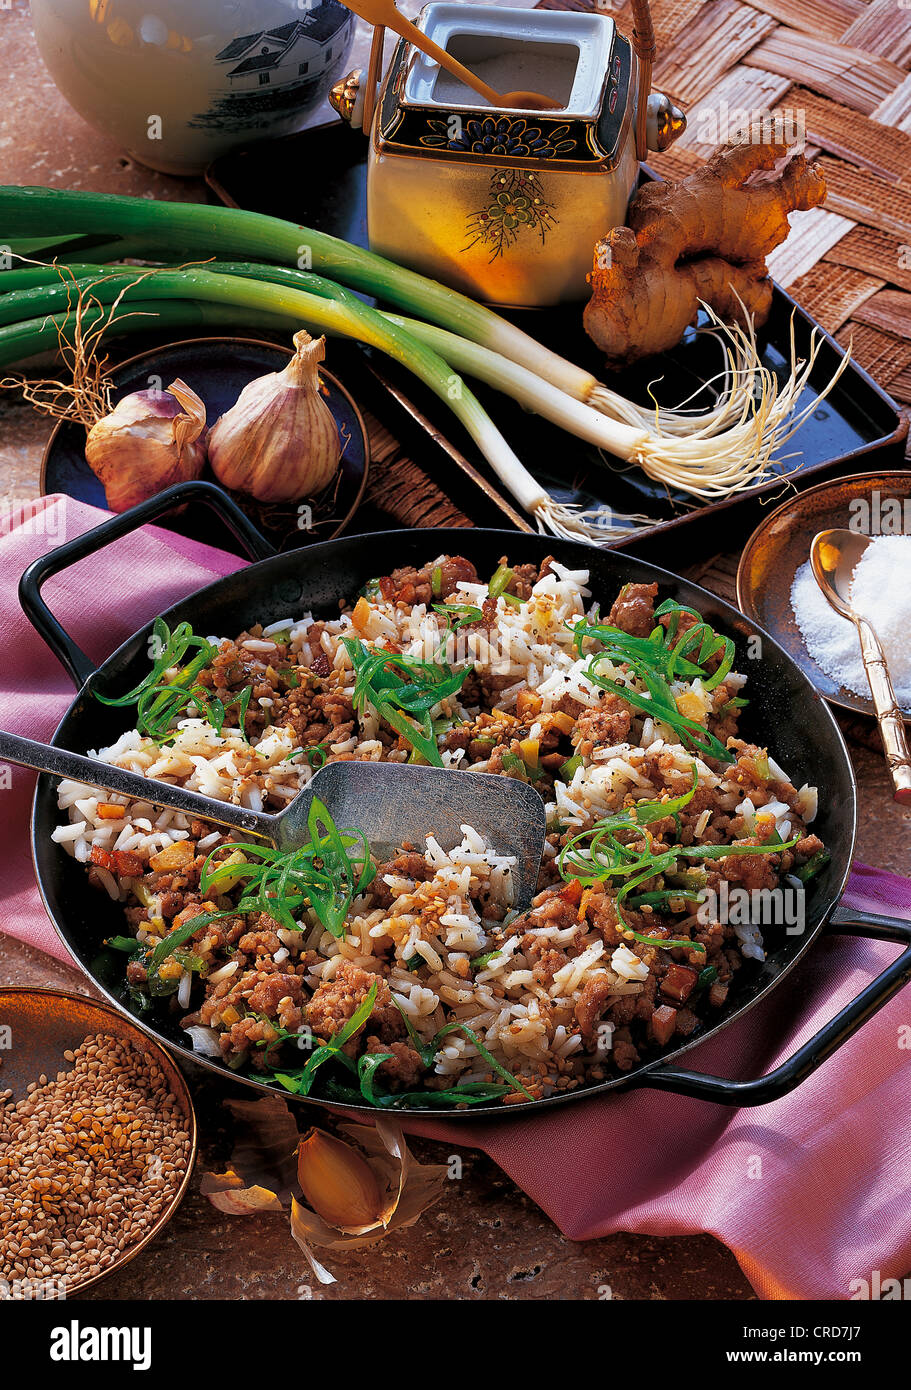 Fried rice with meat, minced pork, finely diced vegetables, herbs and spices in a wok, Korea. Stock Photo